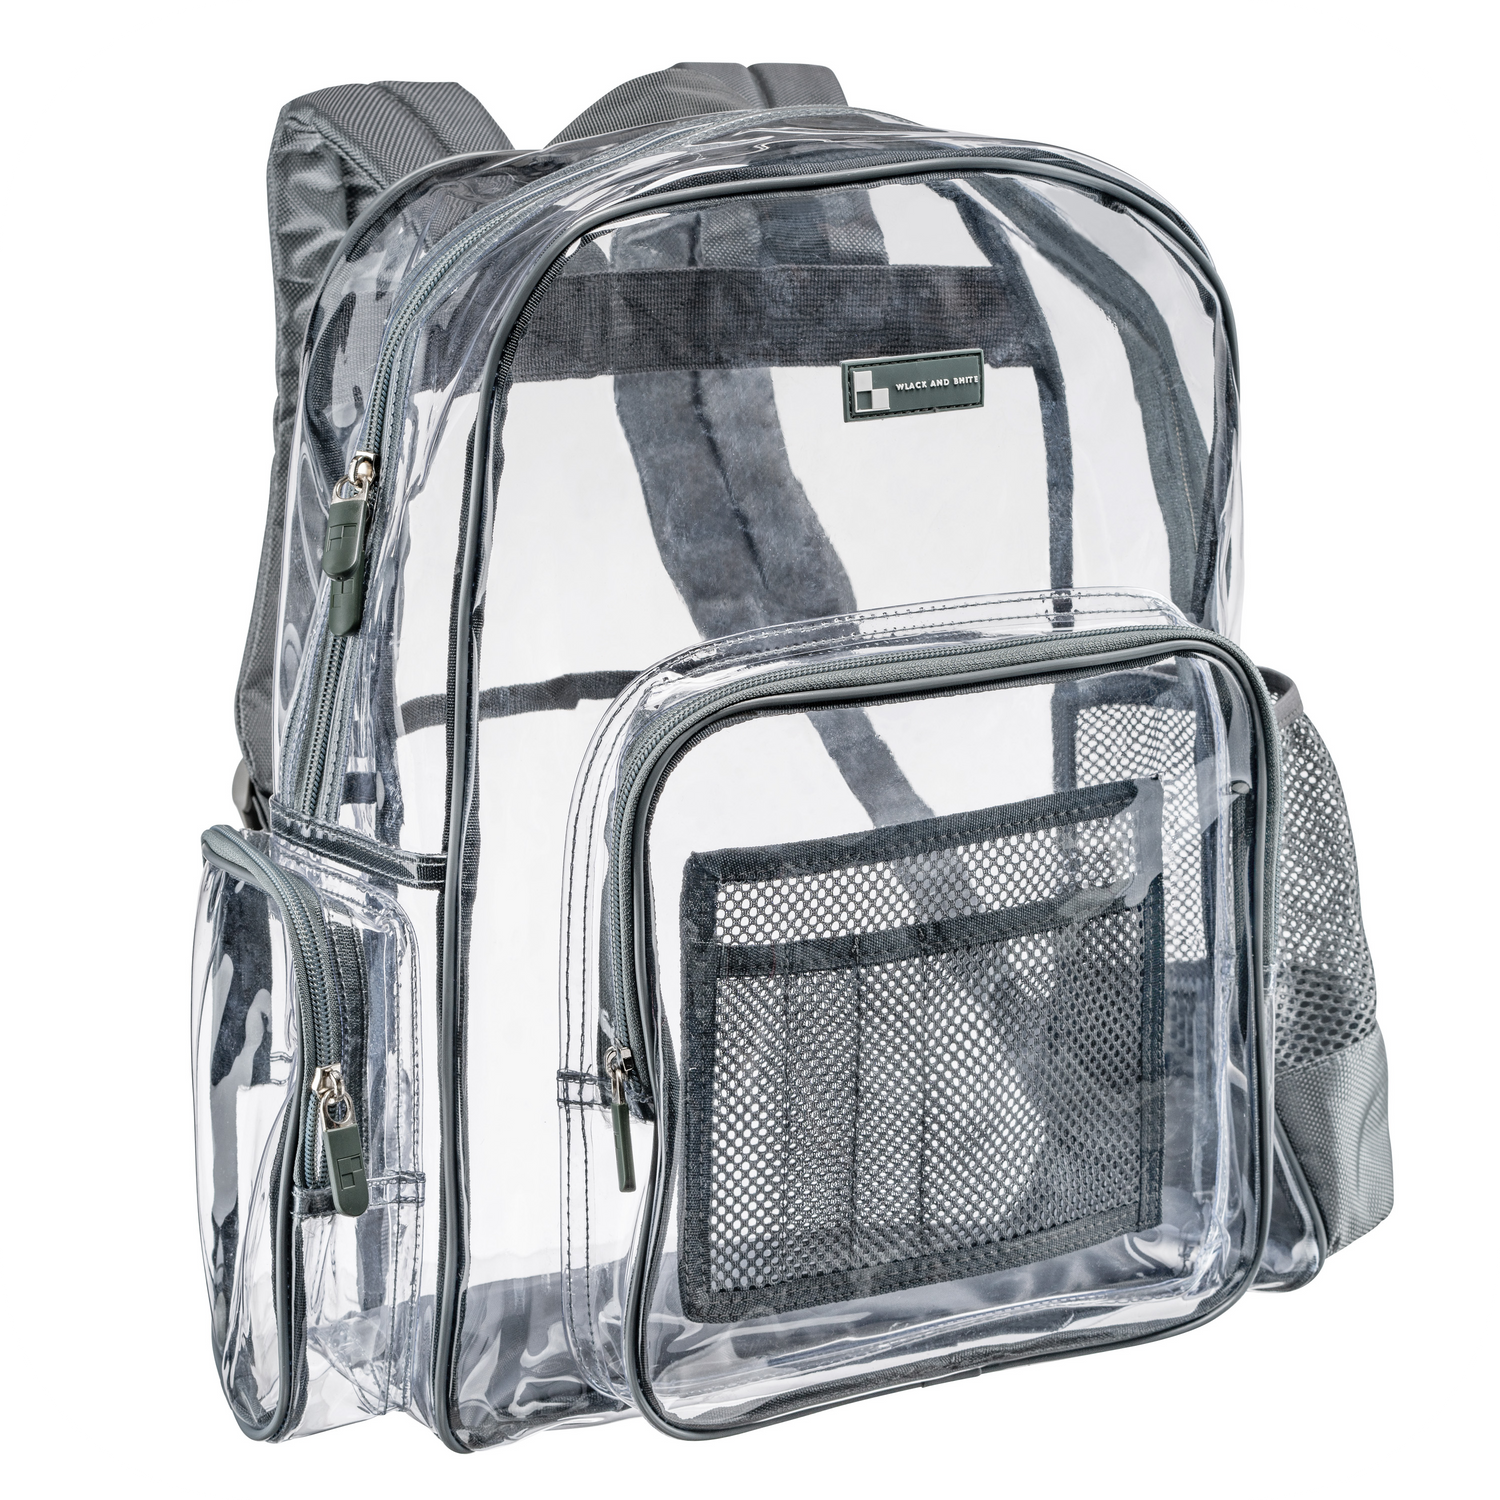 Clear Bags & Backpacks at